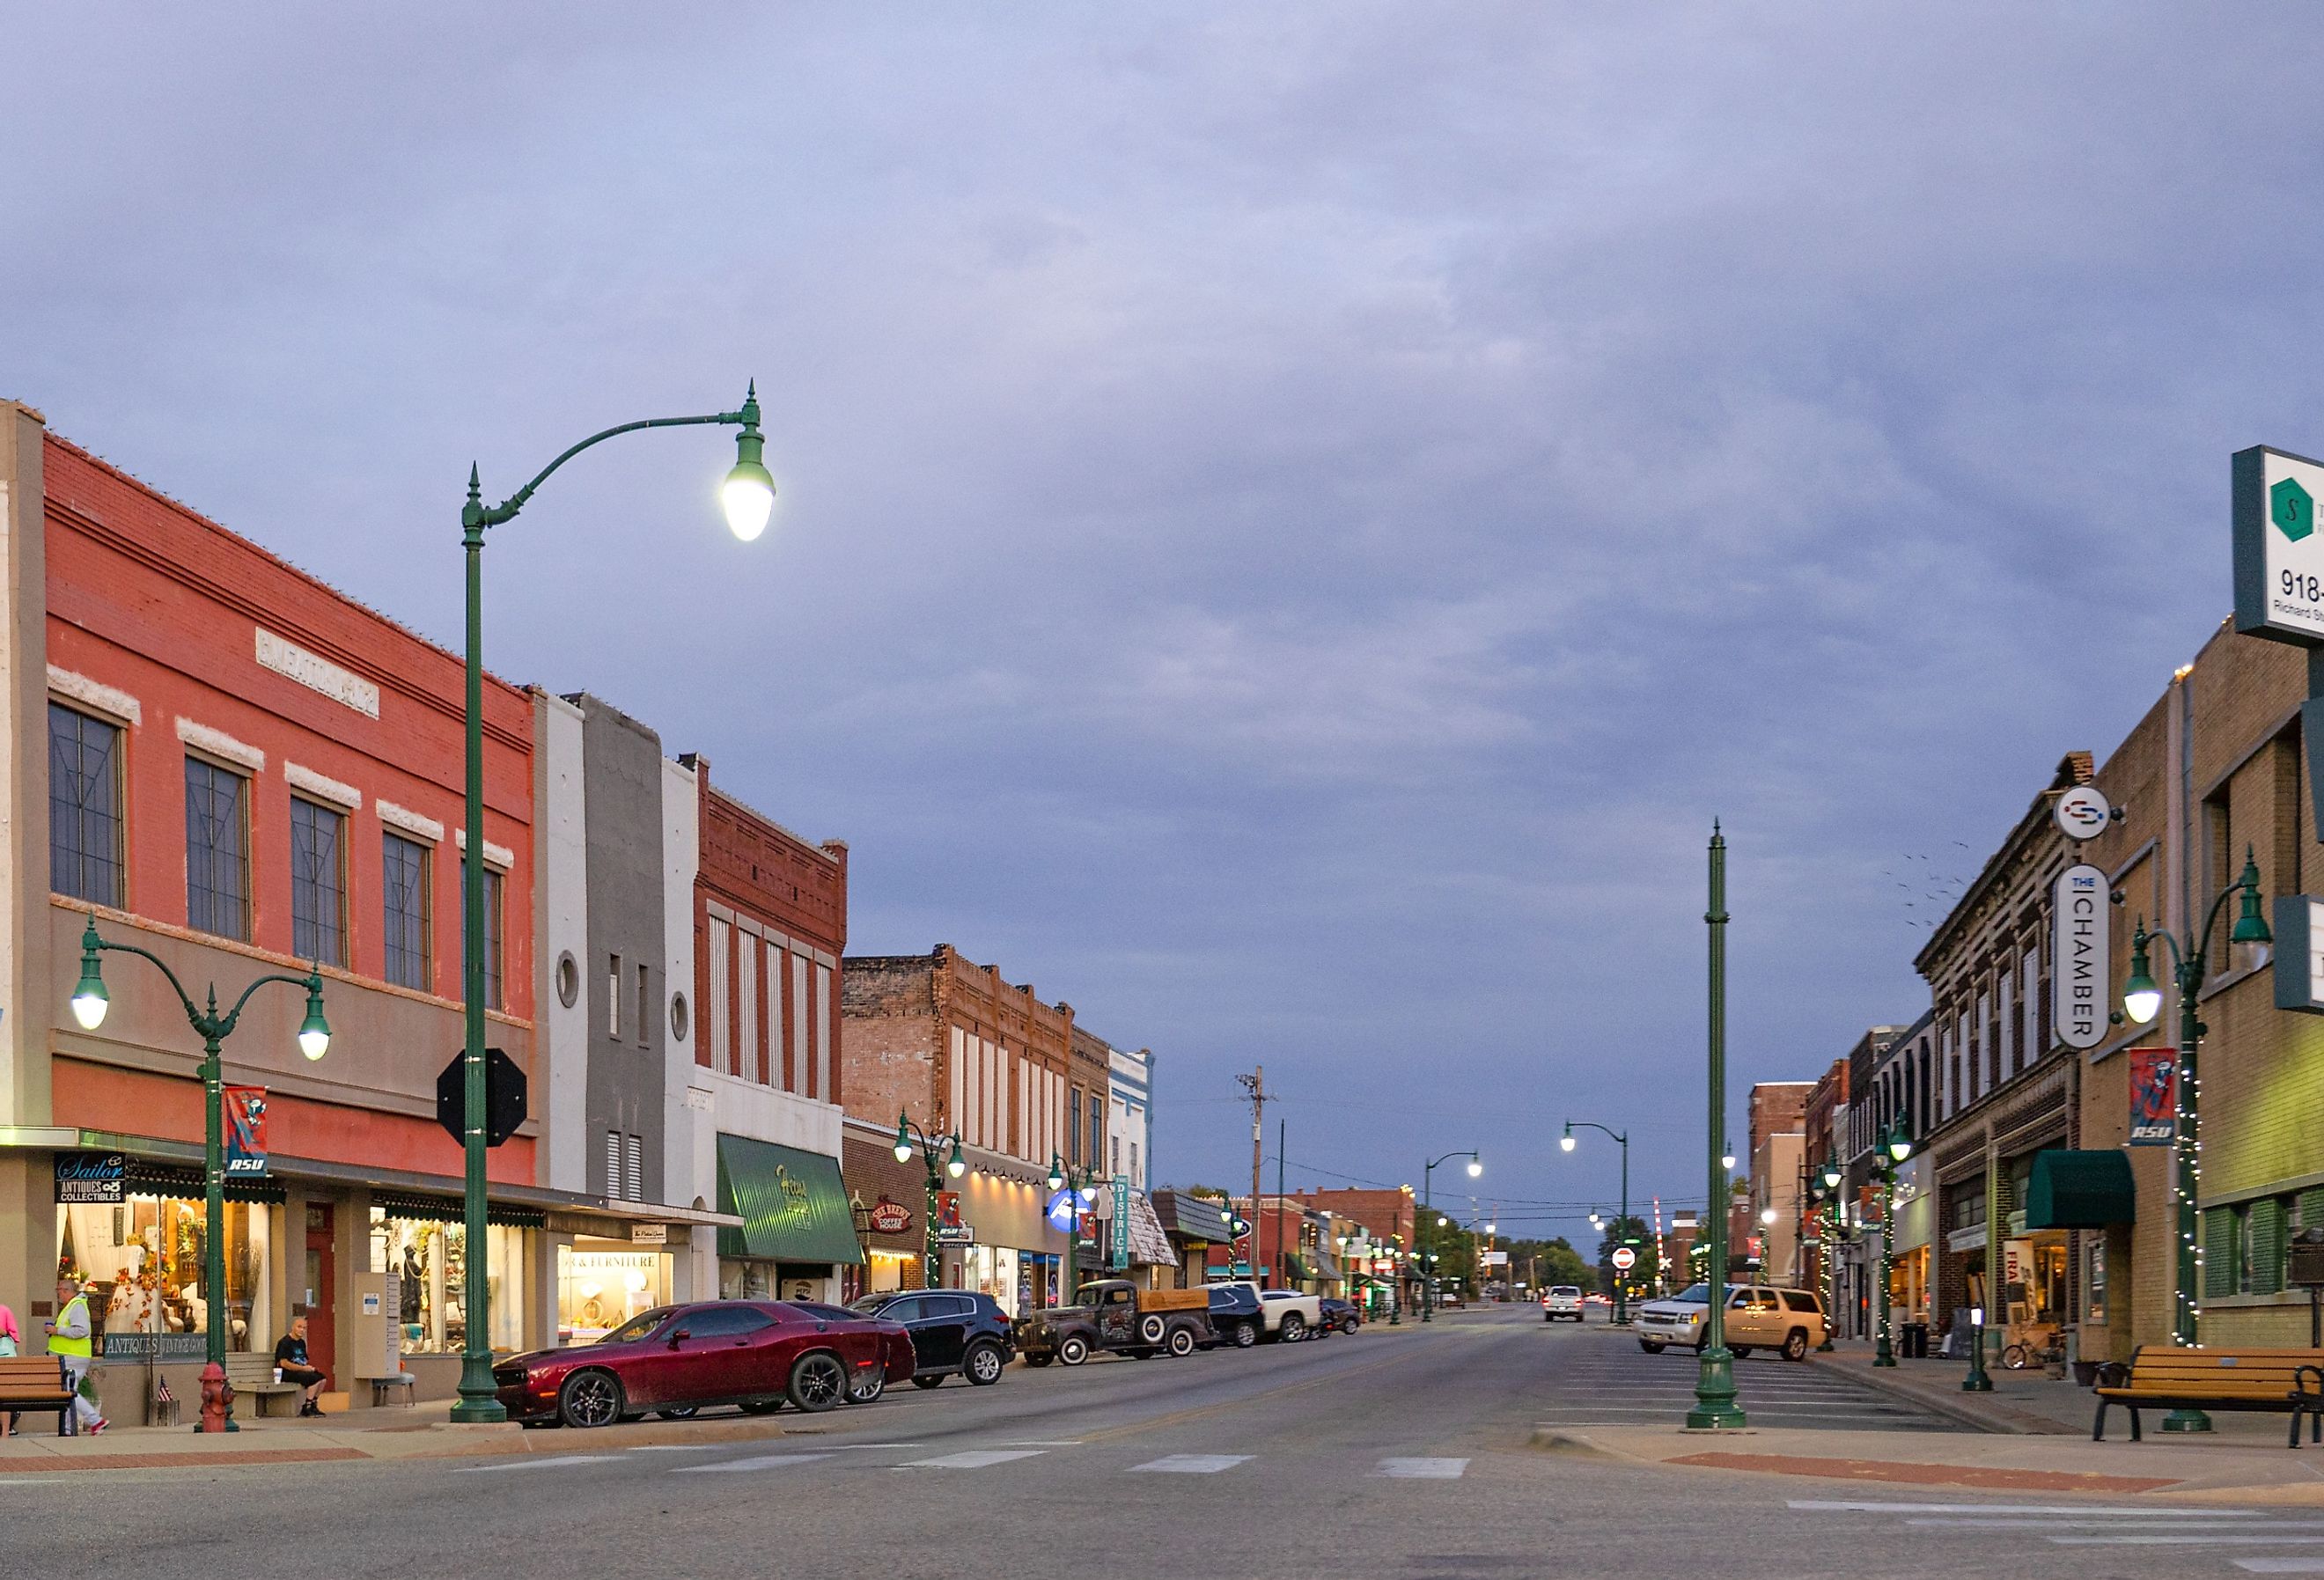 The old business district on Will Rogers Boulevard in Claremore, Oklahoma. Image credit Roberto Galan via Shutterstock.